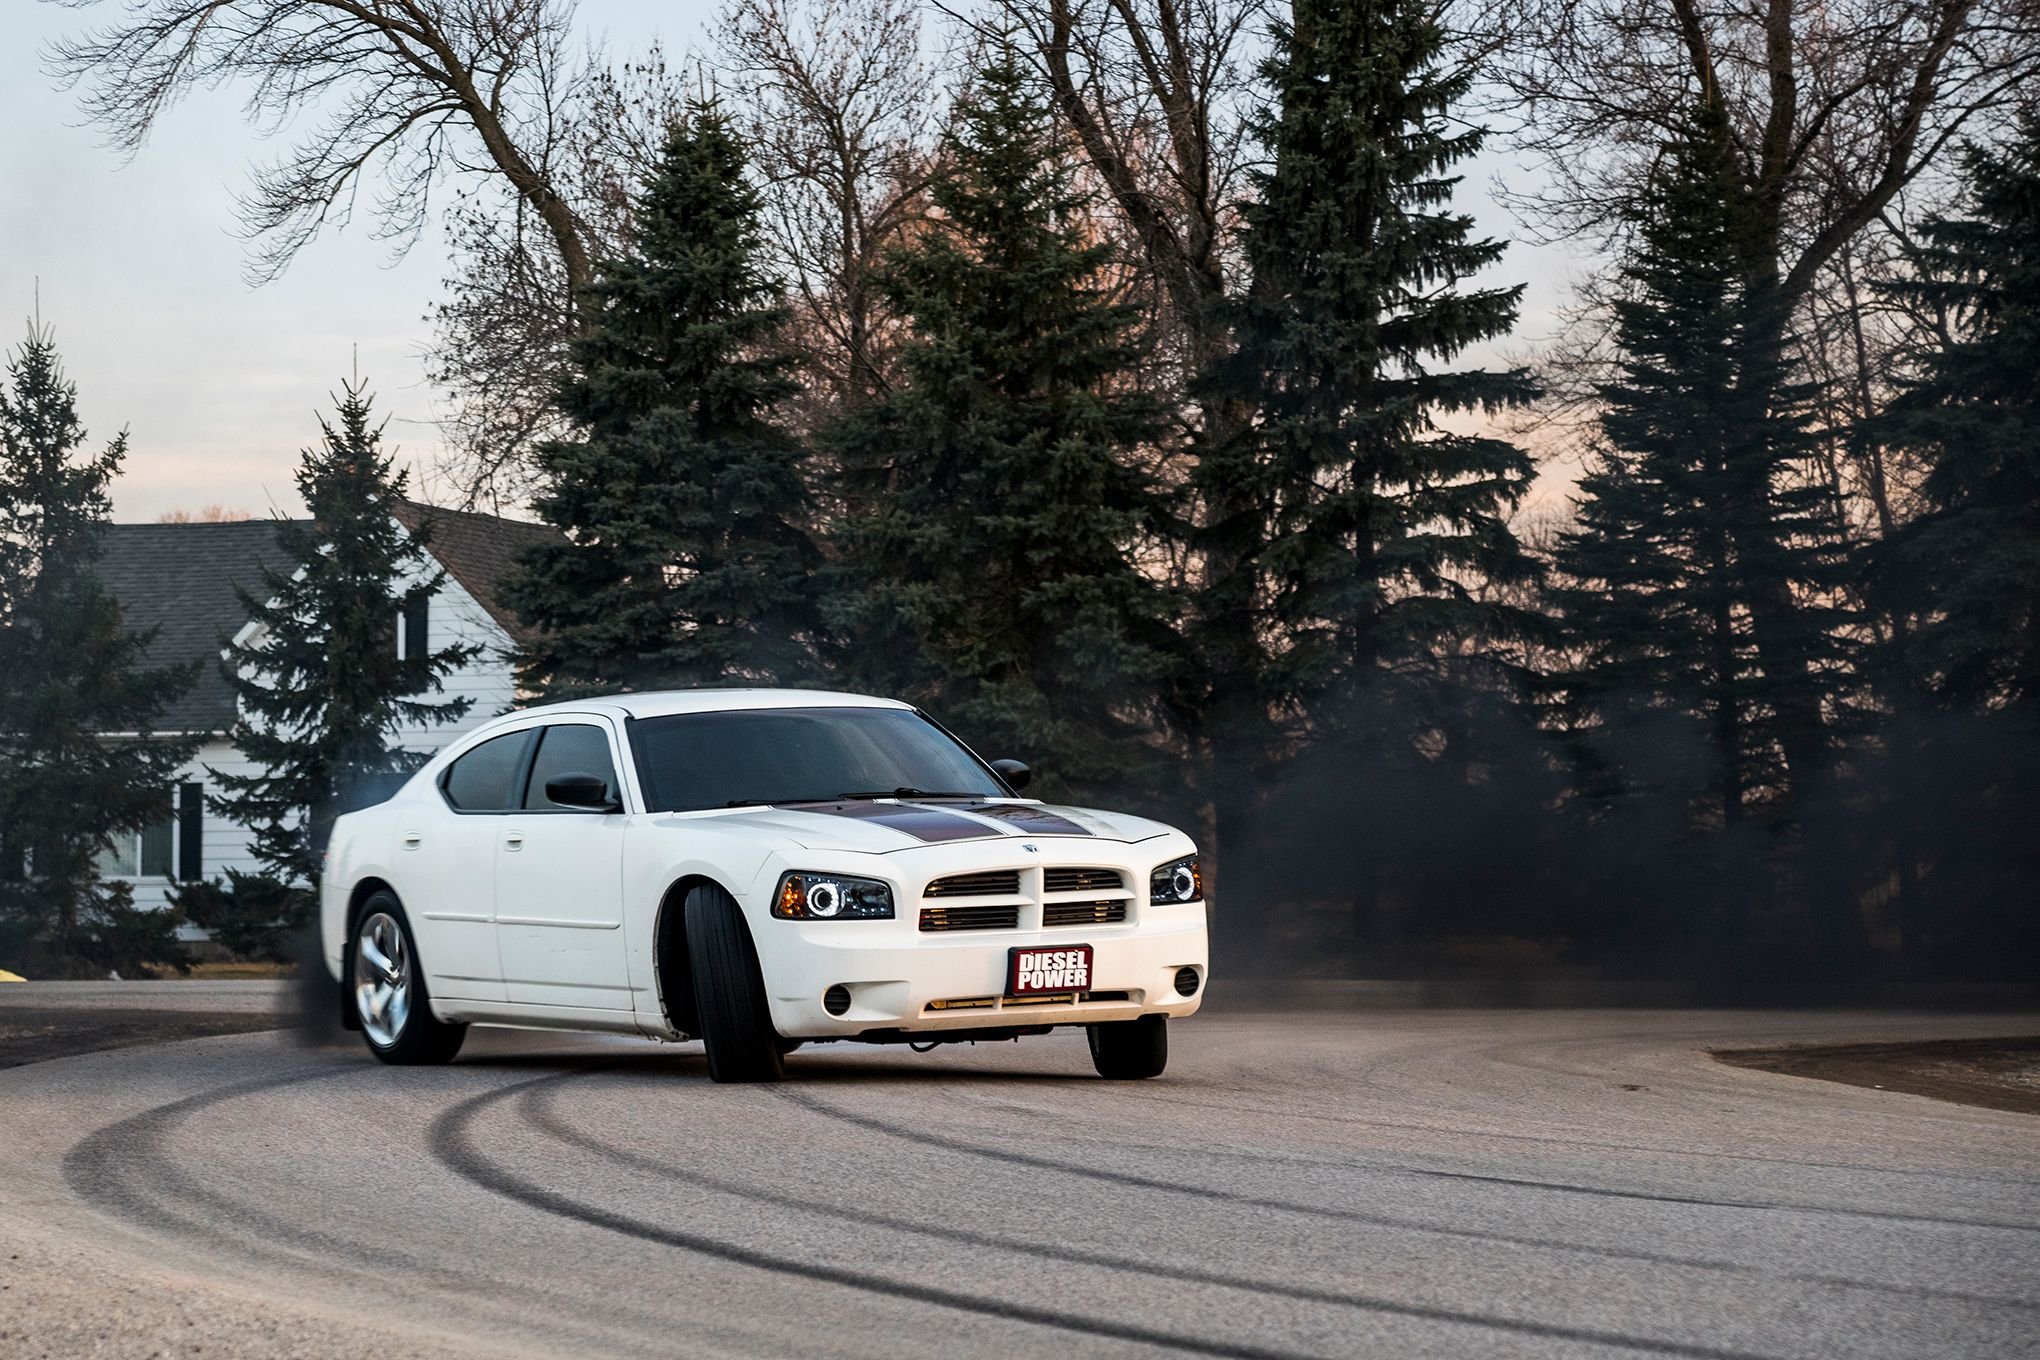 2006, Dodge, Charger, Charger, Cruise, Super, Street, Usa,  03 Wallpaper